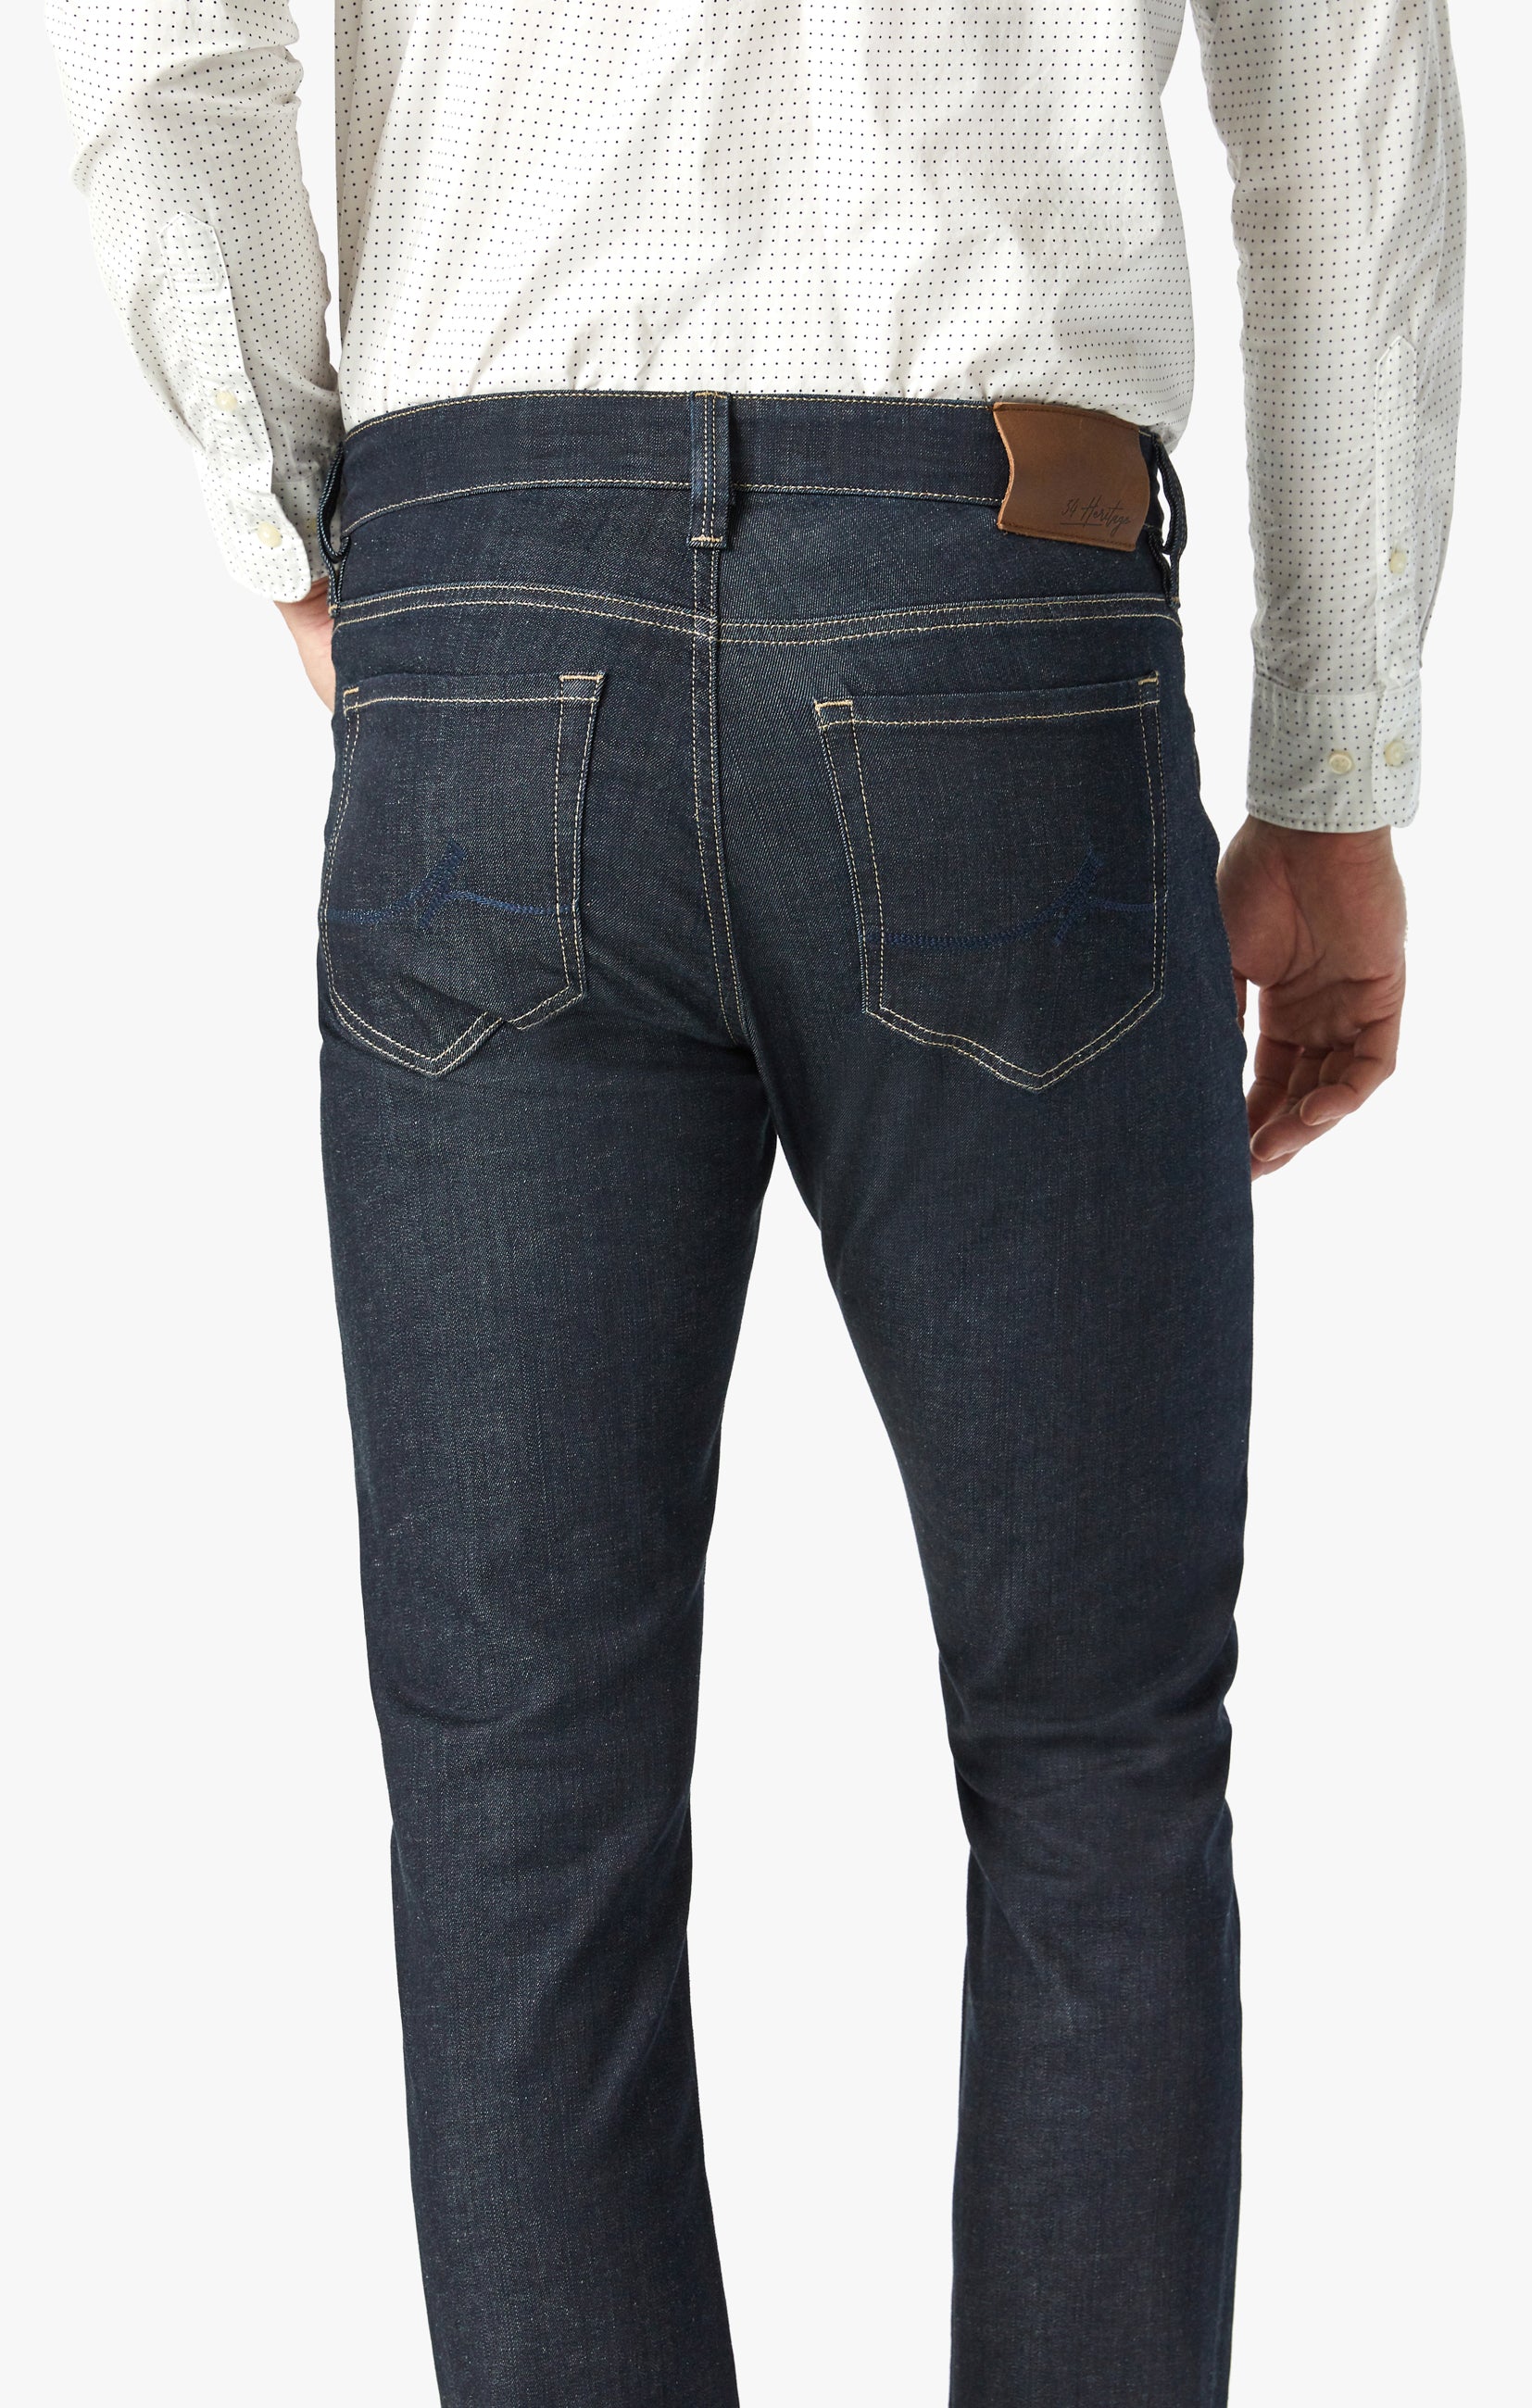 34 Heritage Stories  The Best Men's High Rise Jeans: Our Charisma